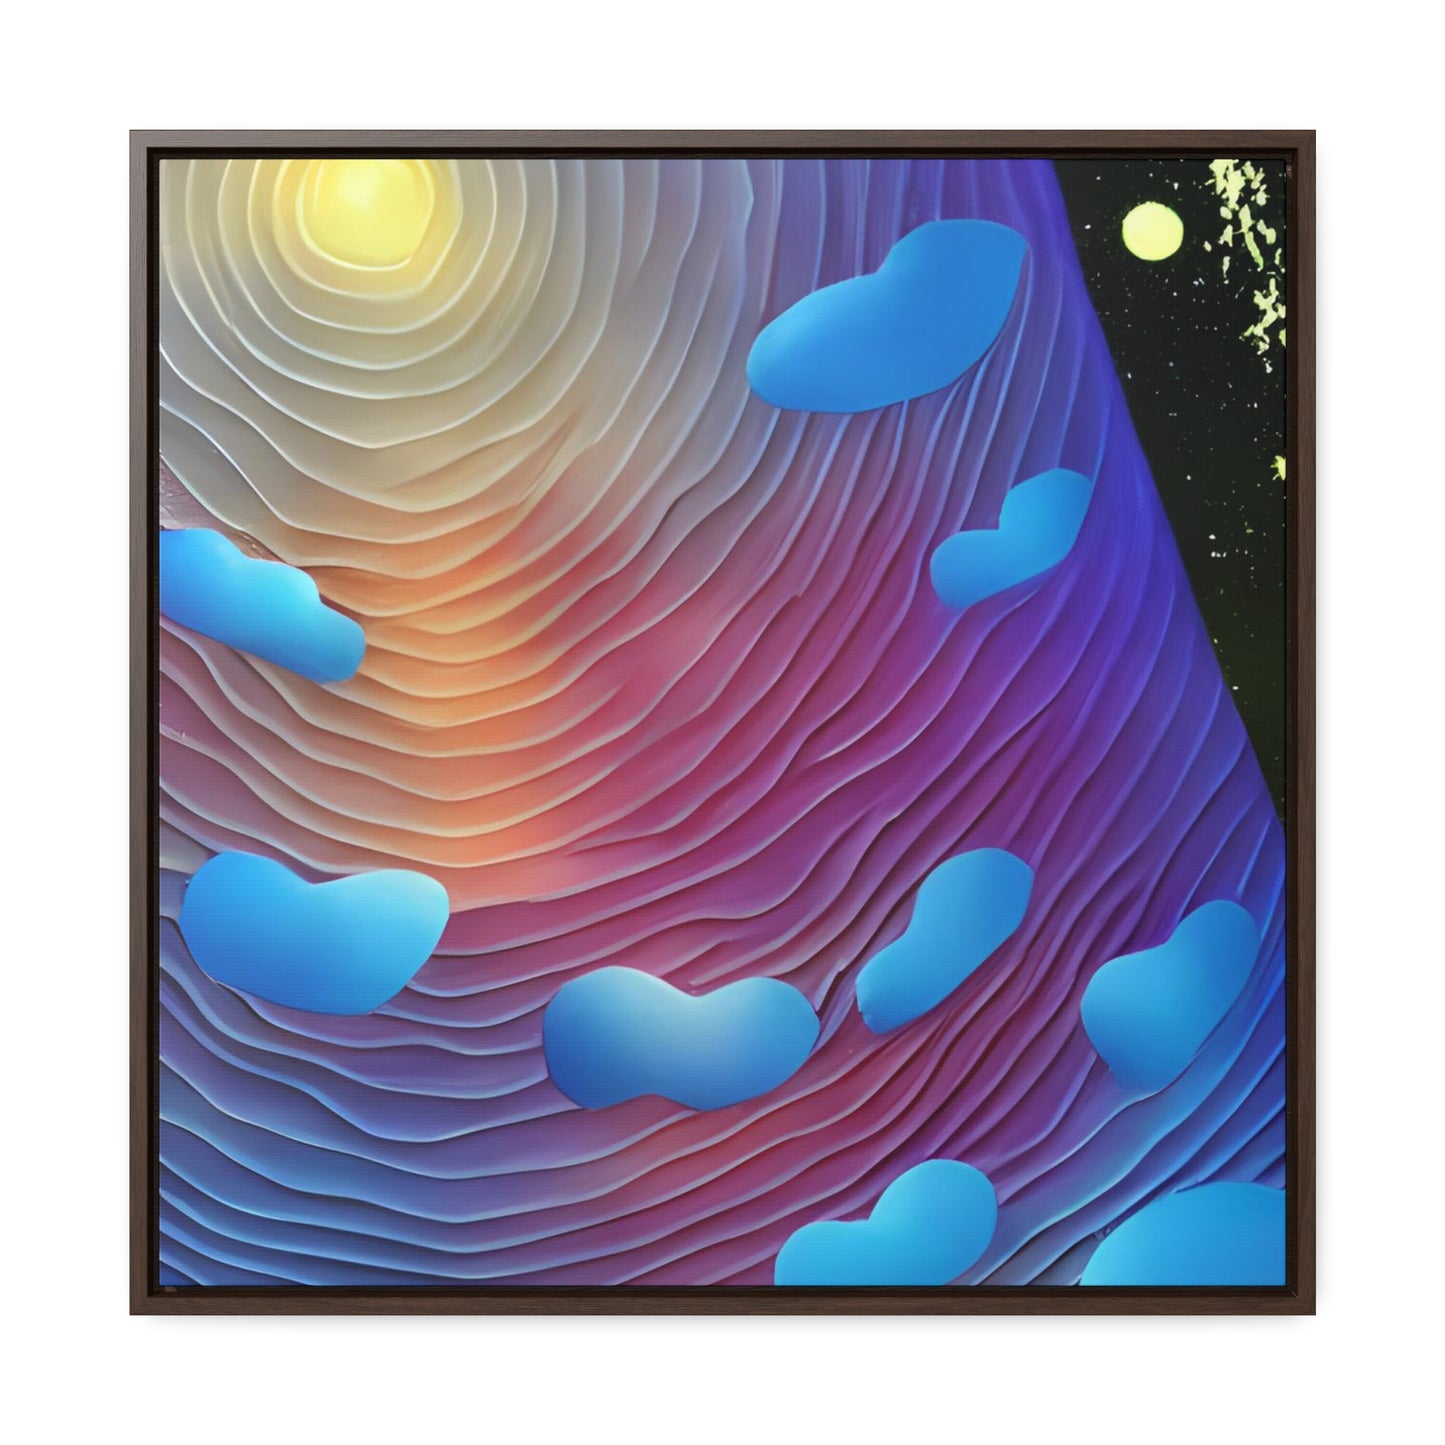 In The Clouds 02 - Framed Gallery Canvas